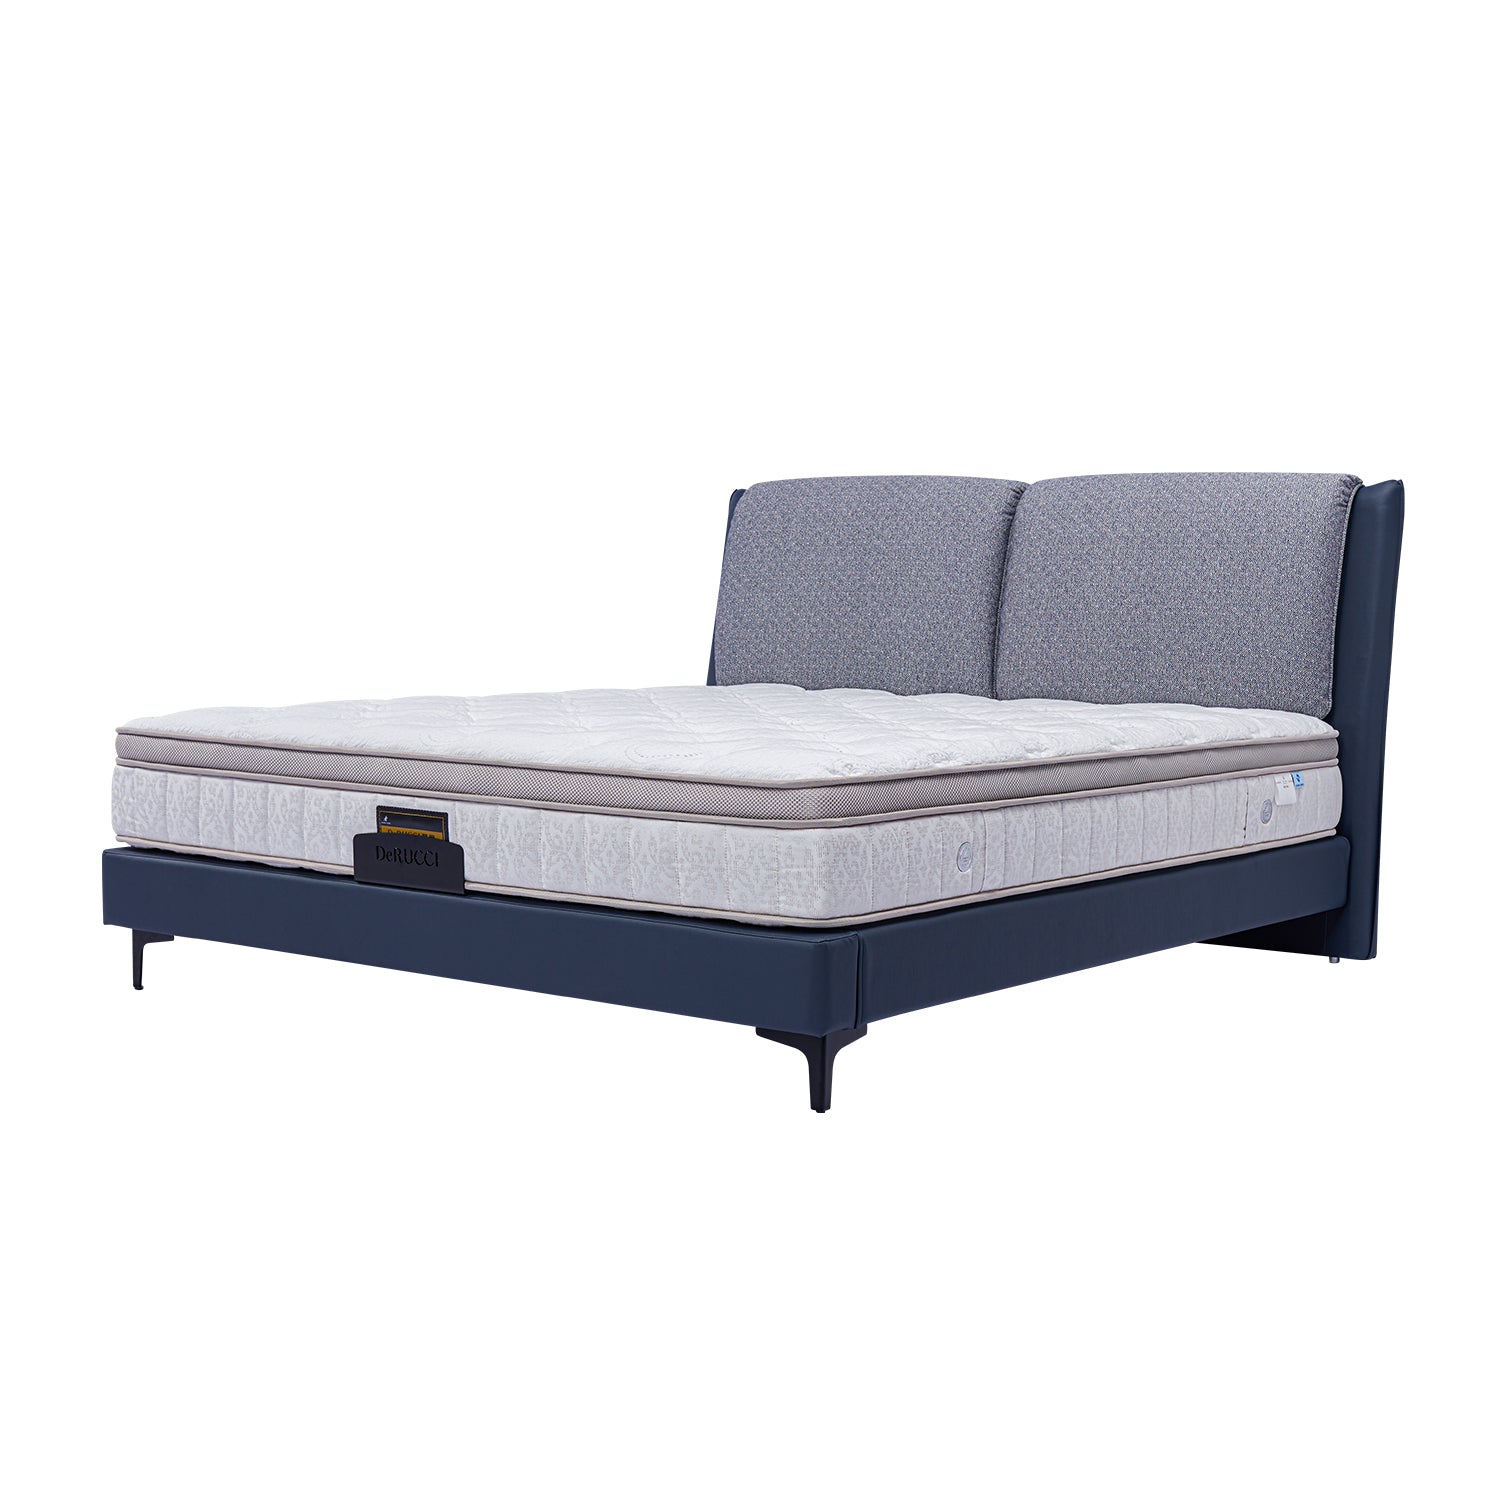 DeRUCCI Bed Frame BOC1 - 017 with navy blue frame and gray fabric headboard. Includes a white tufted mattress. Modern and elegant bedroom furniture design.